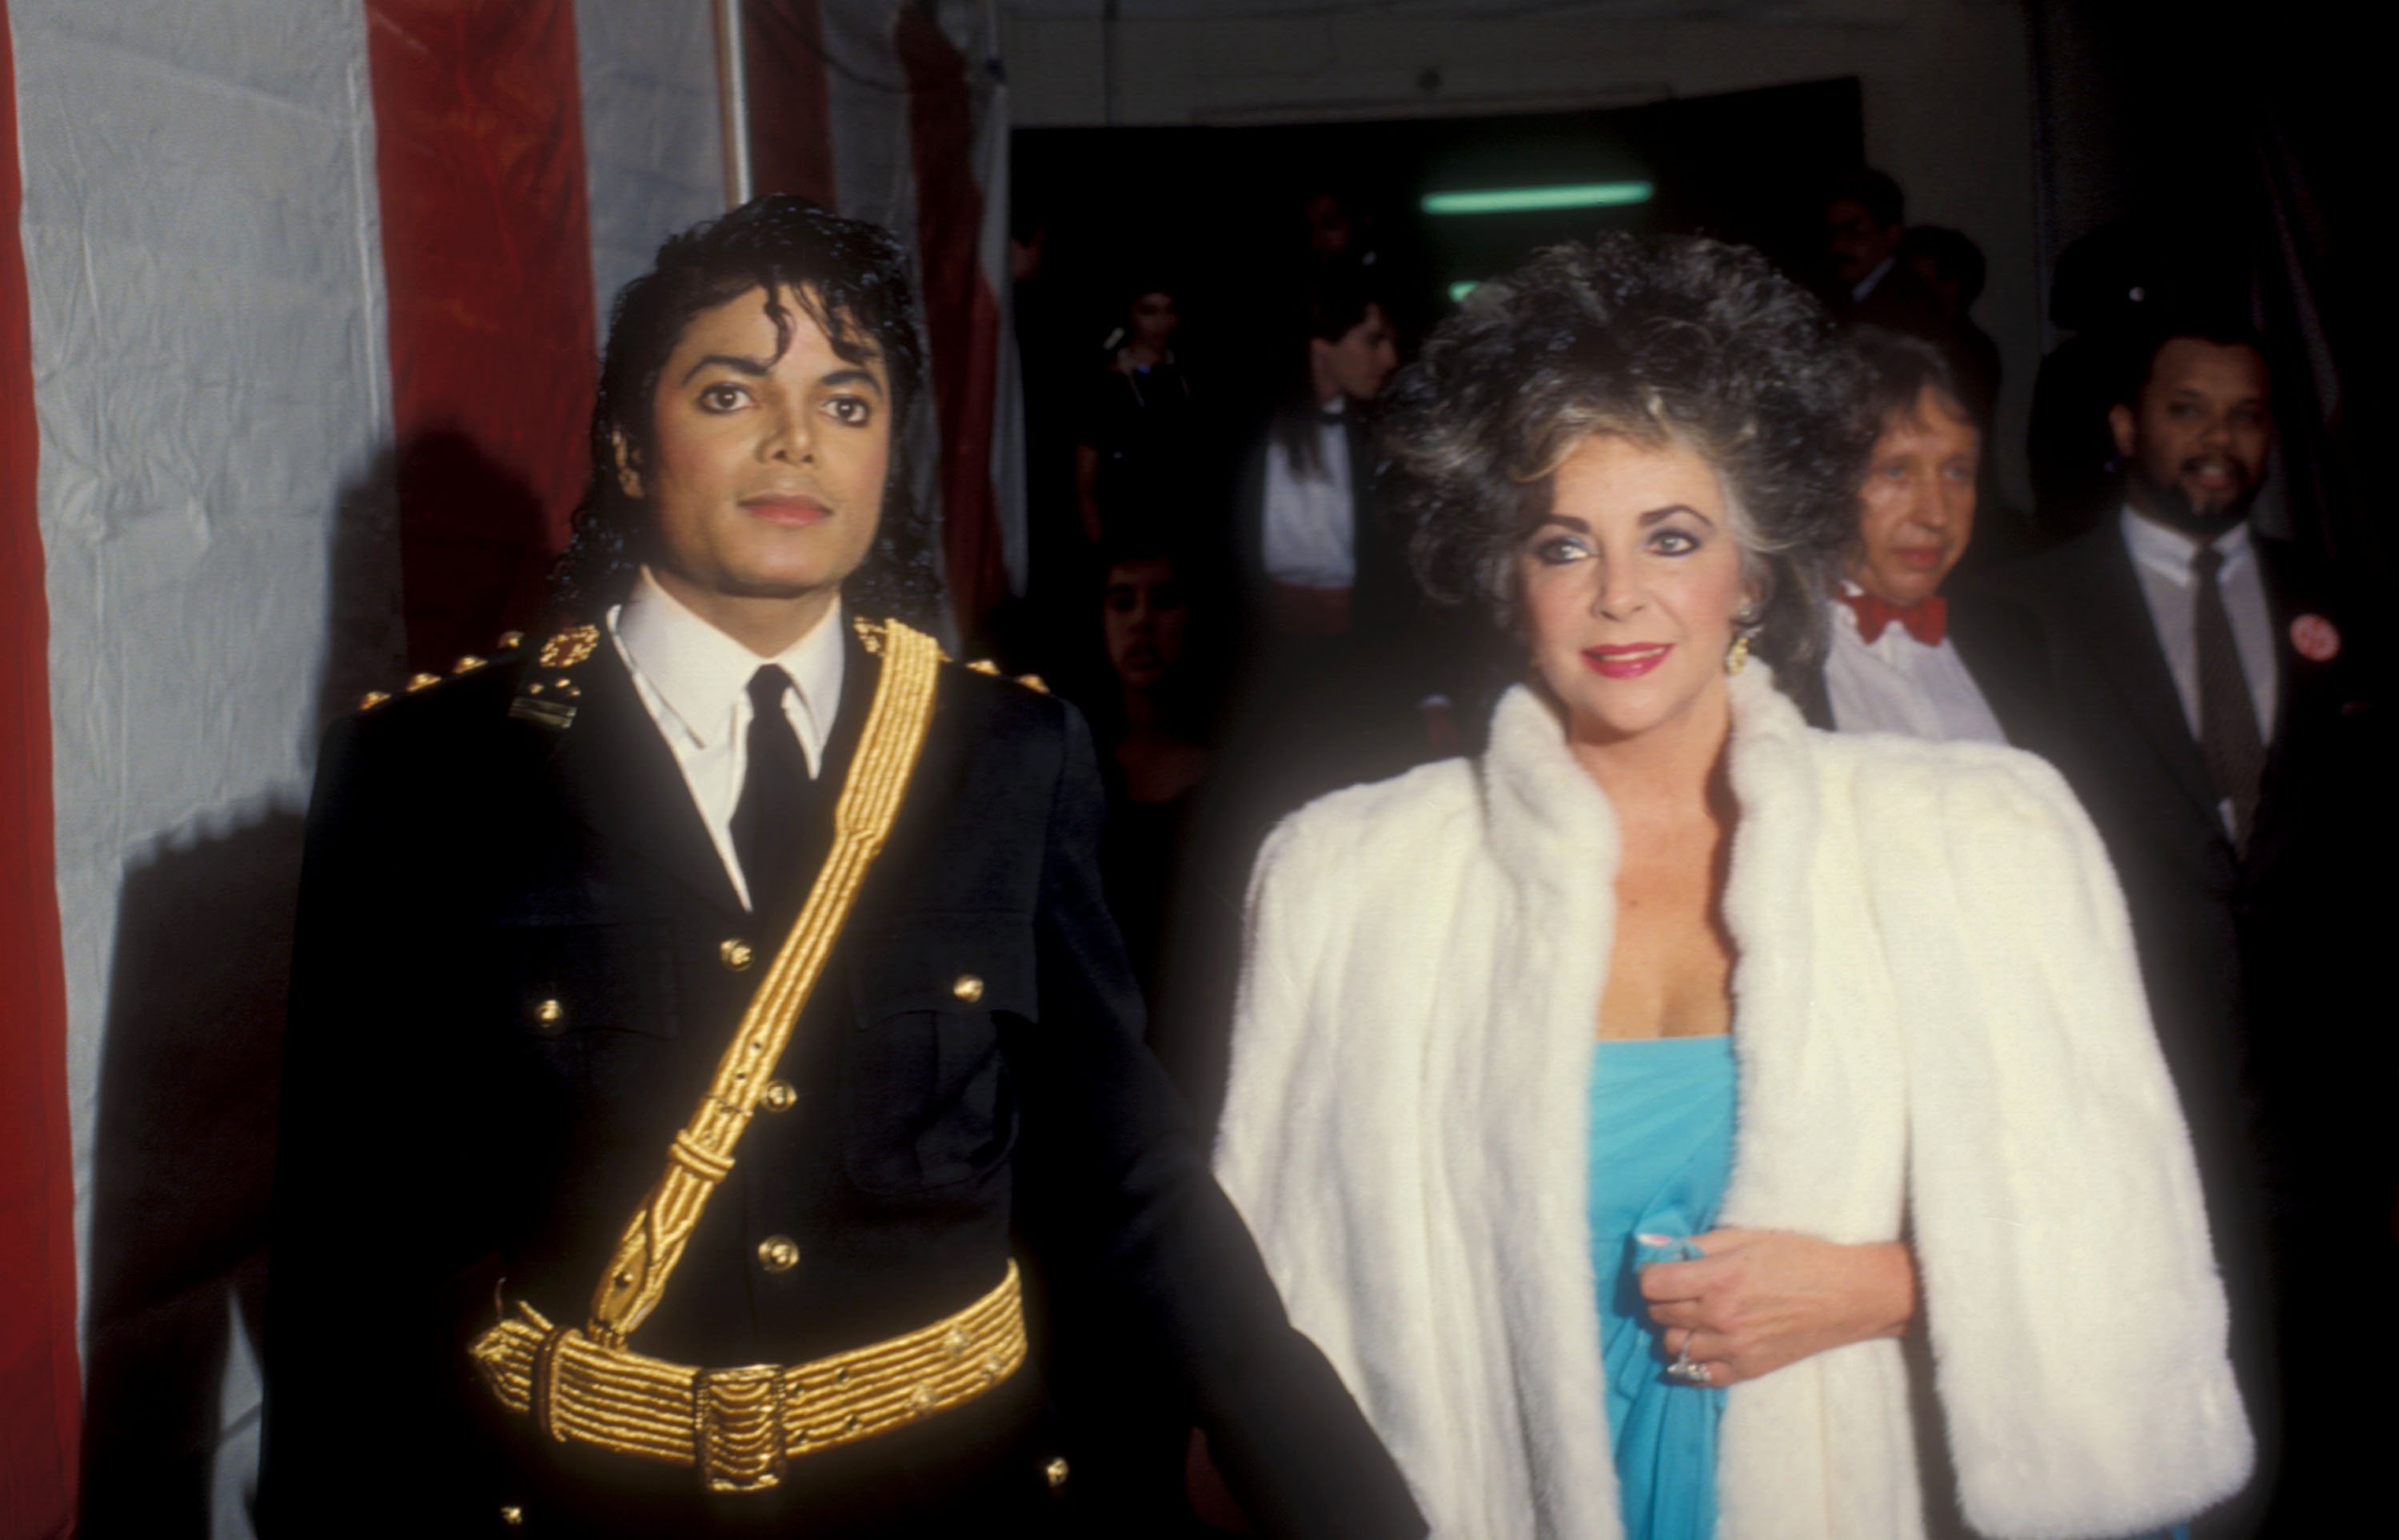 Michael Jackson and Elizabeth Taylor at the 14th Annual American Music Awards | Source: Getty Images